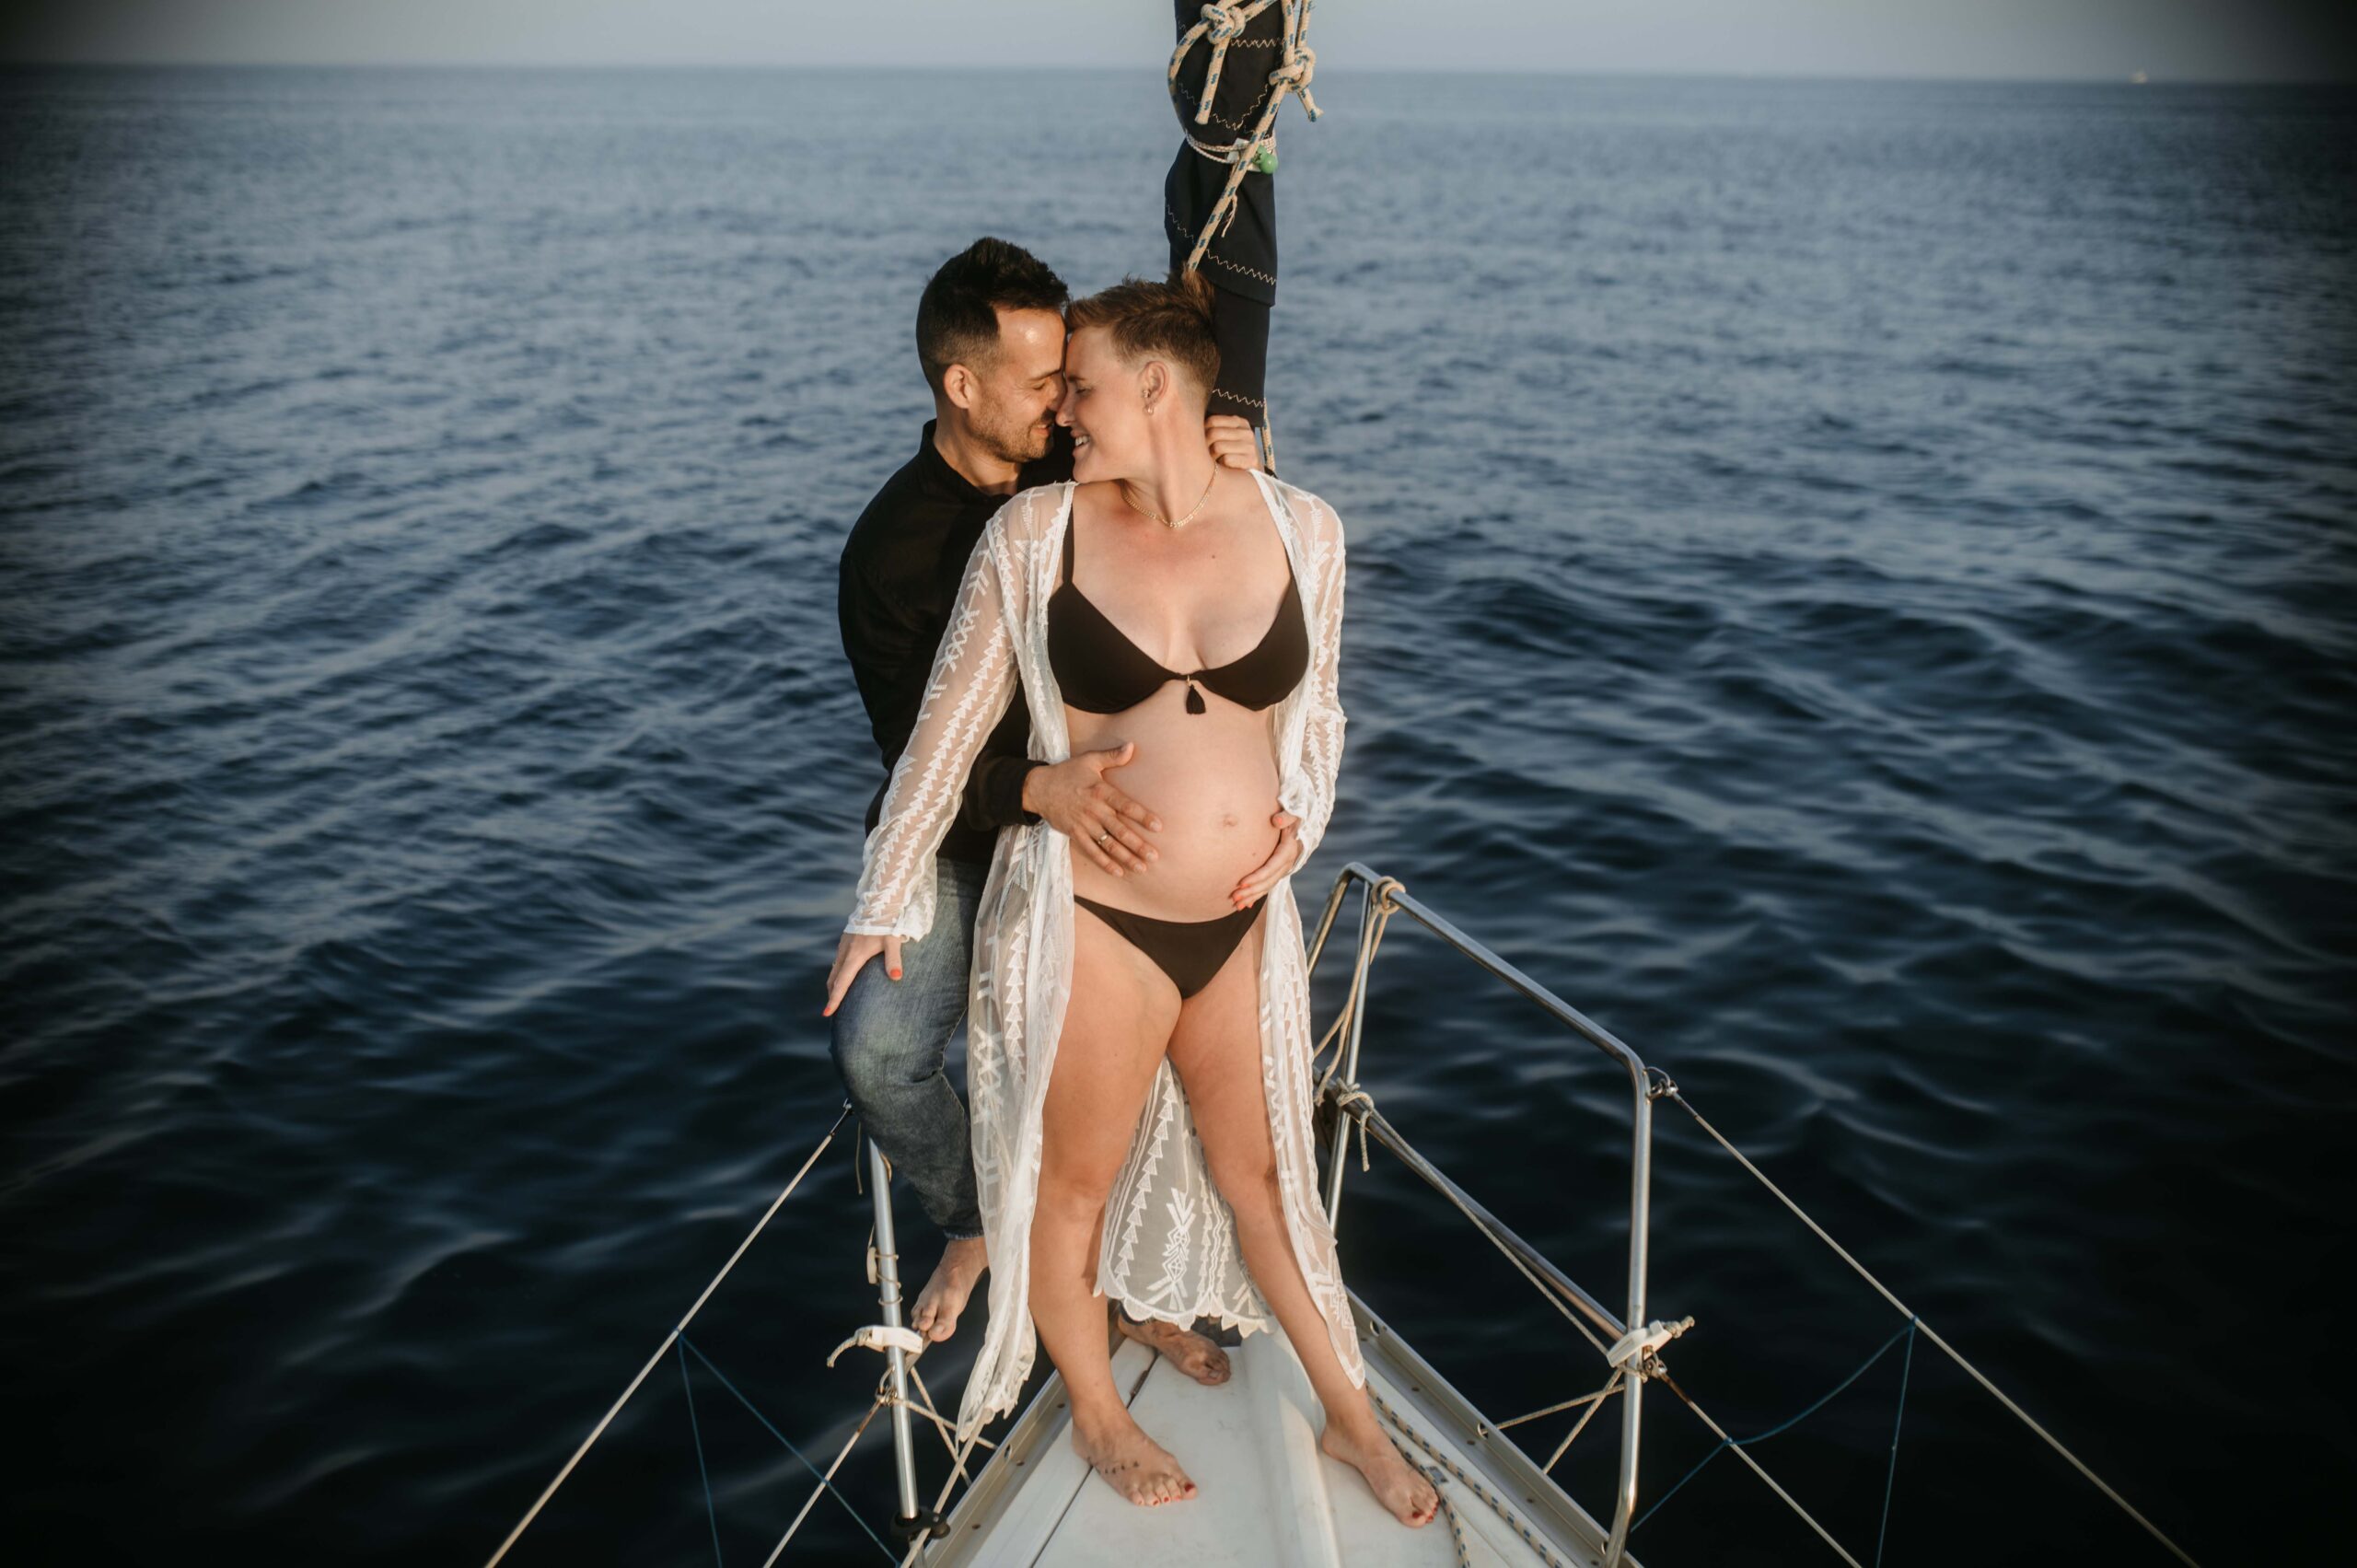 Couple photo session in the sea